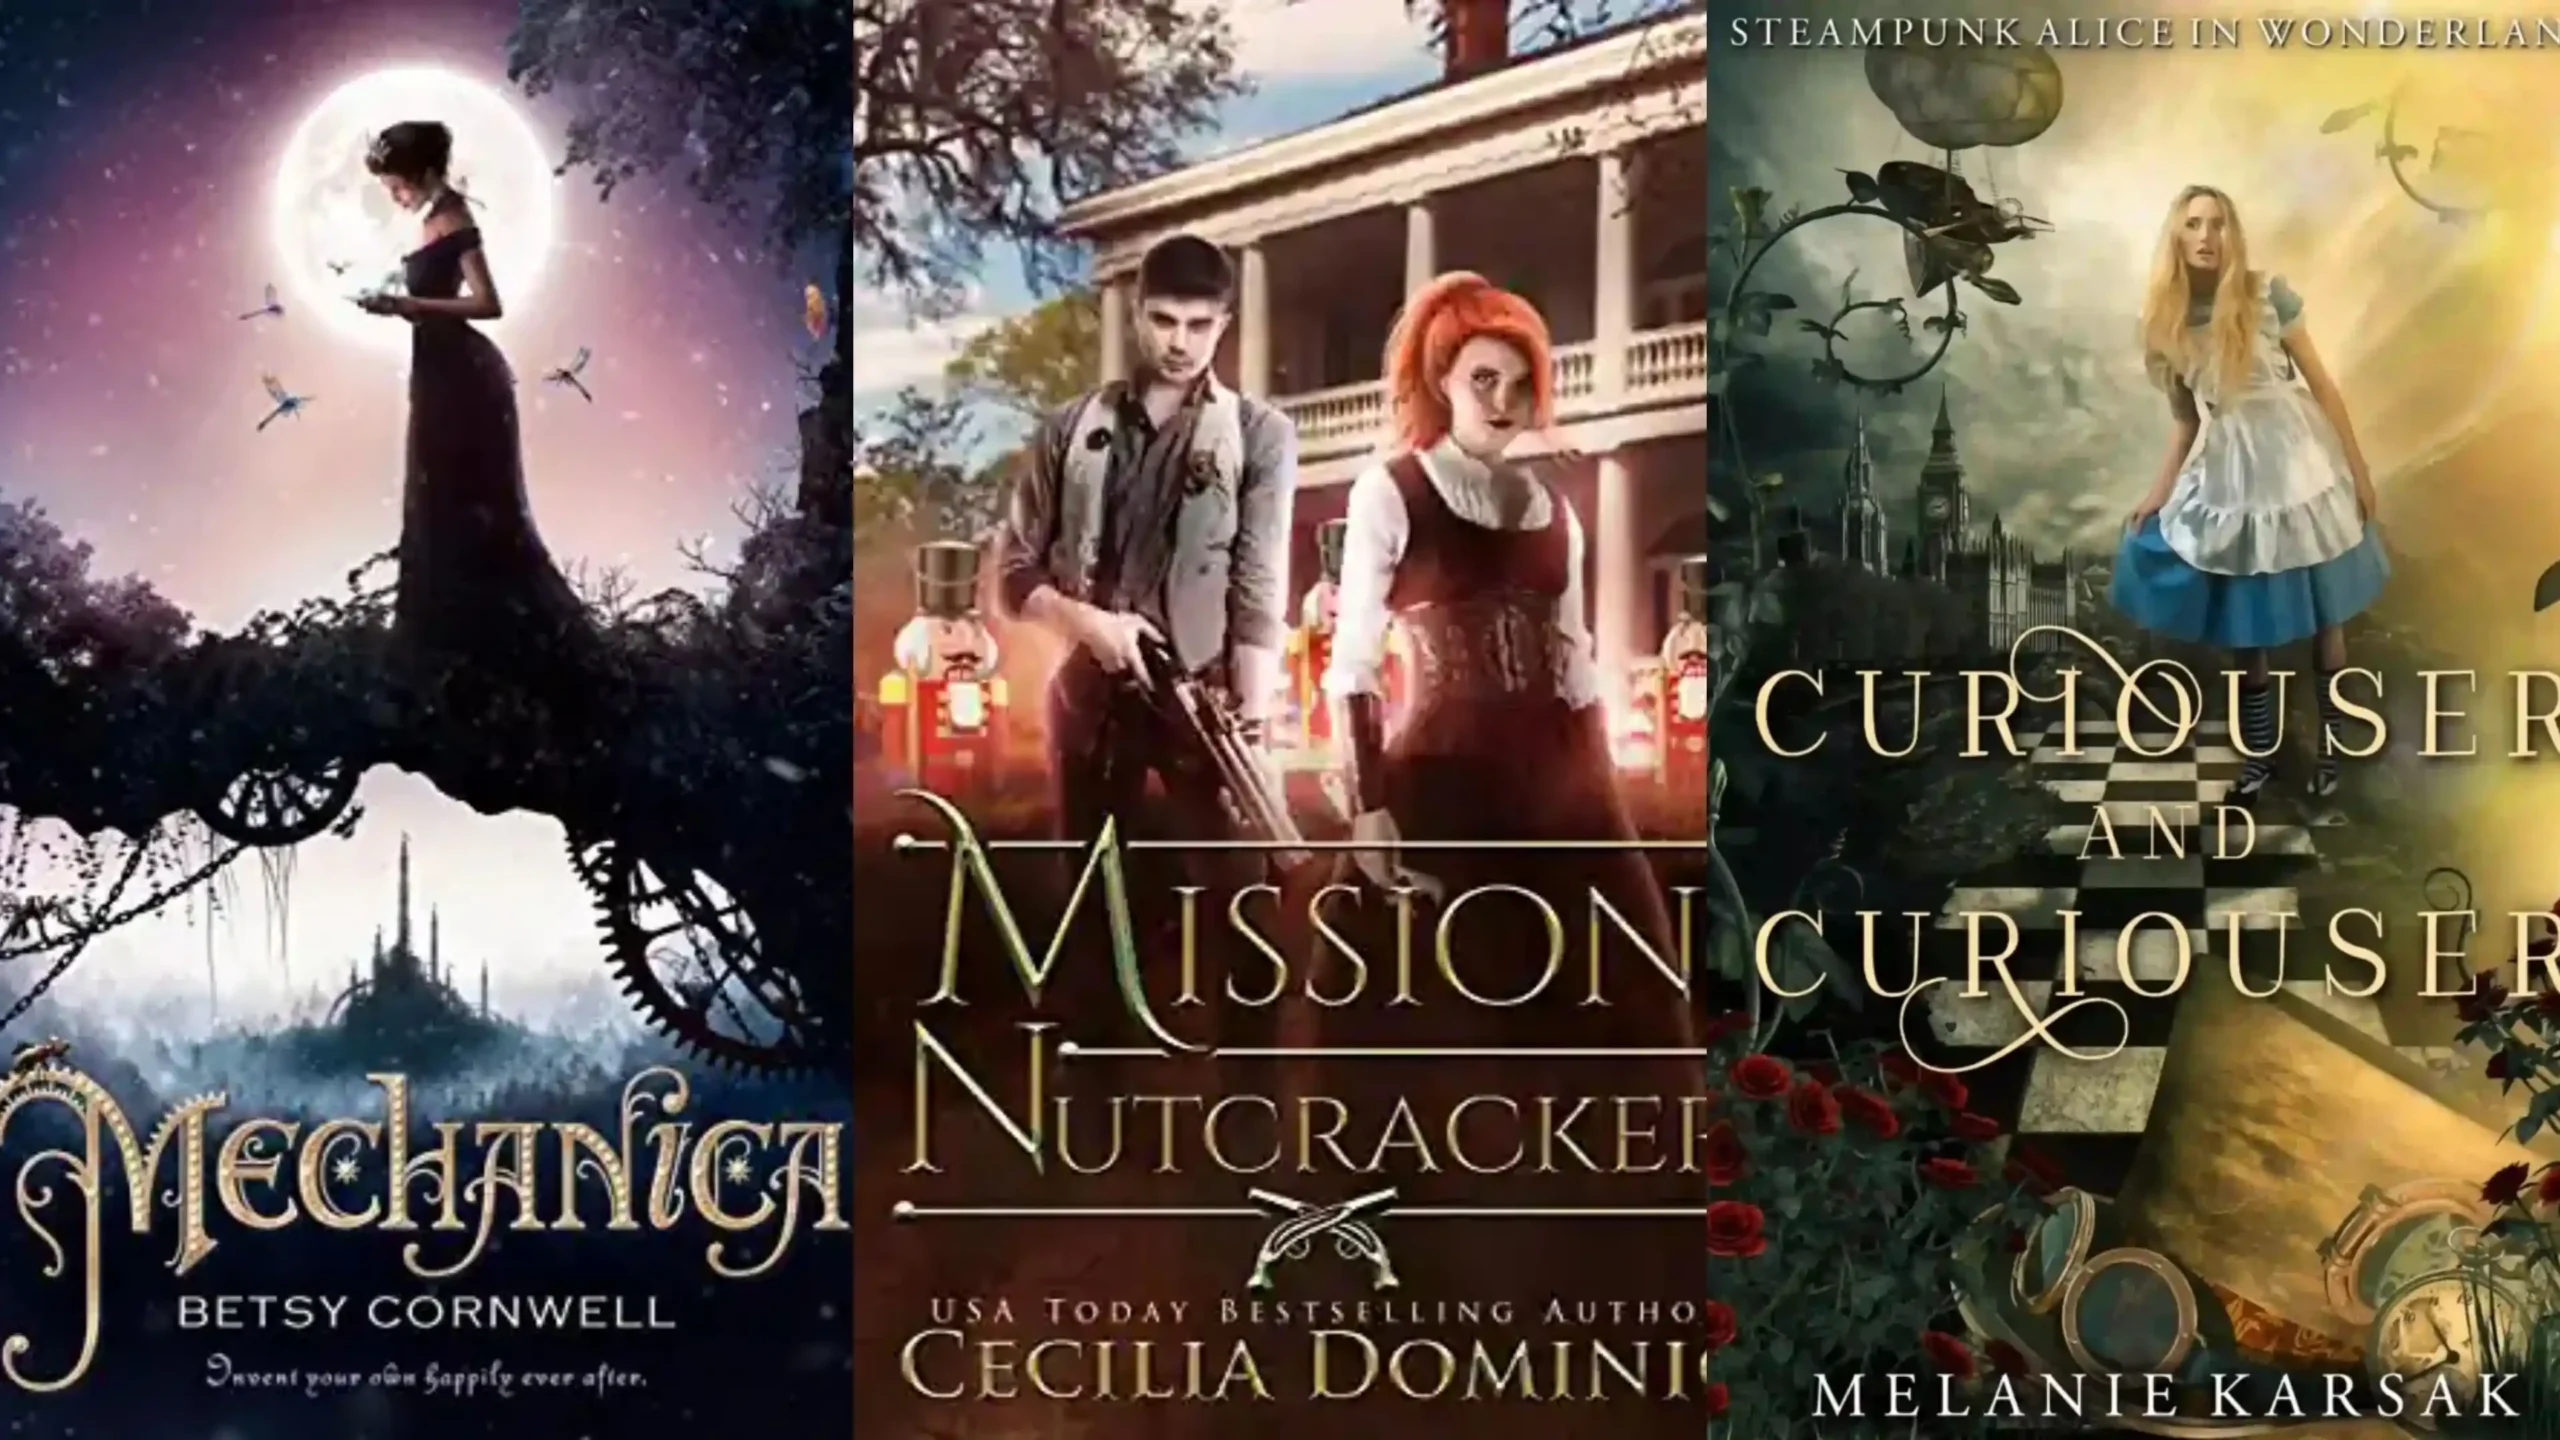 Best steampunk retelling of books to read scaled